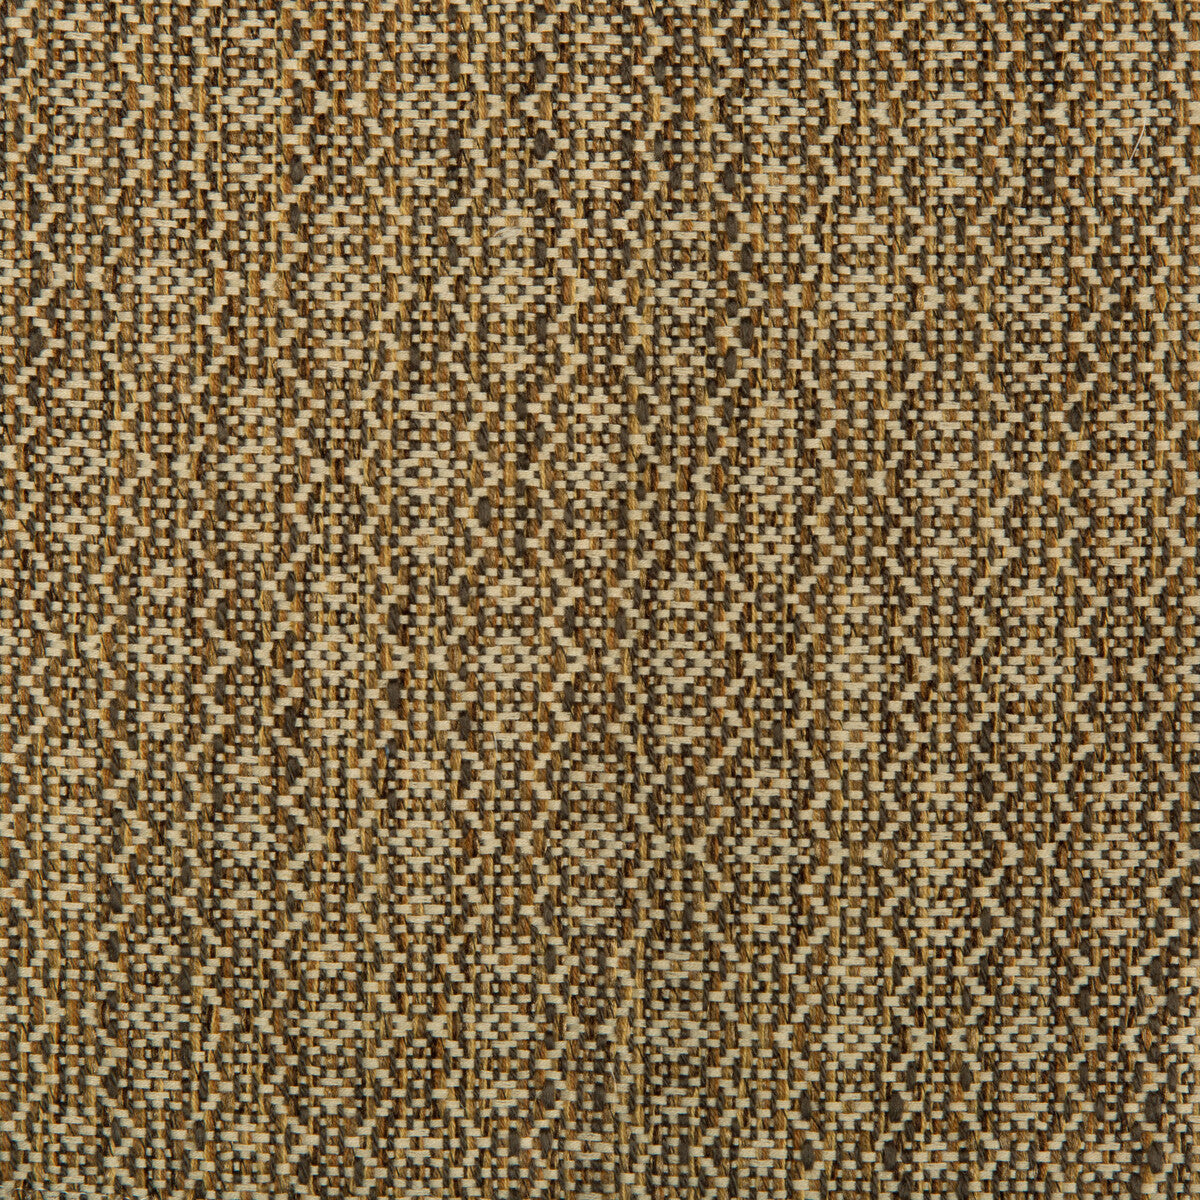 Kravet Smart fabric in 34625-616 color - pattern 34625.616.0 - by Kravet Smart in the Performance Crypton Home collection